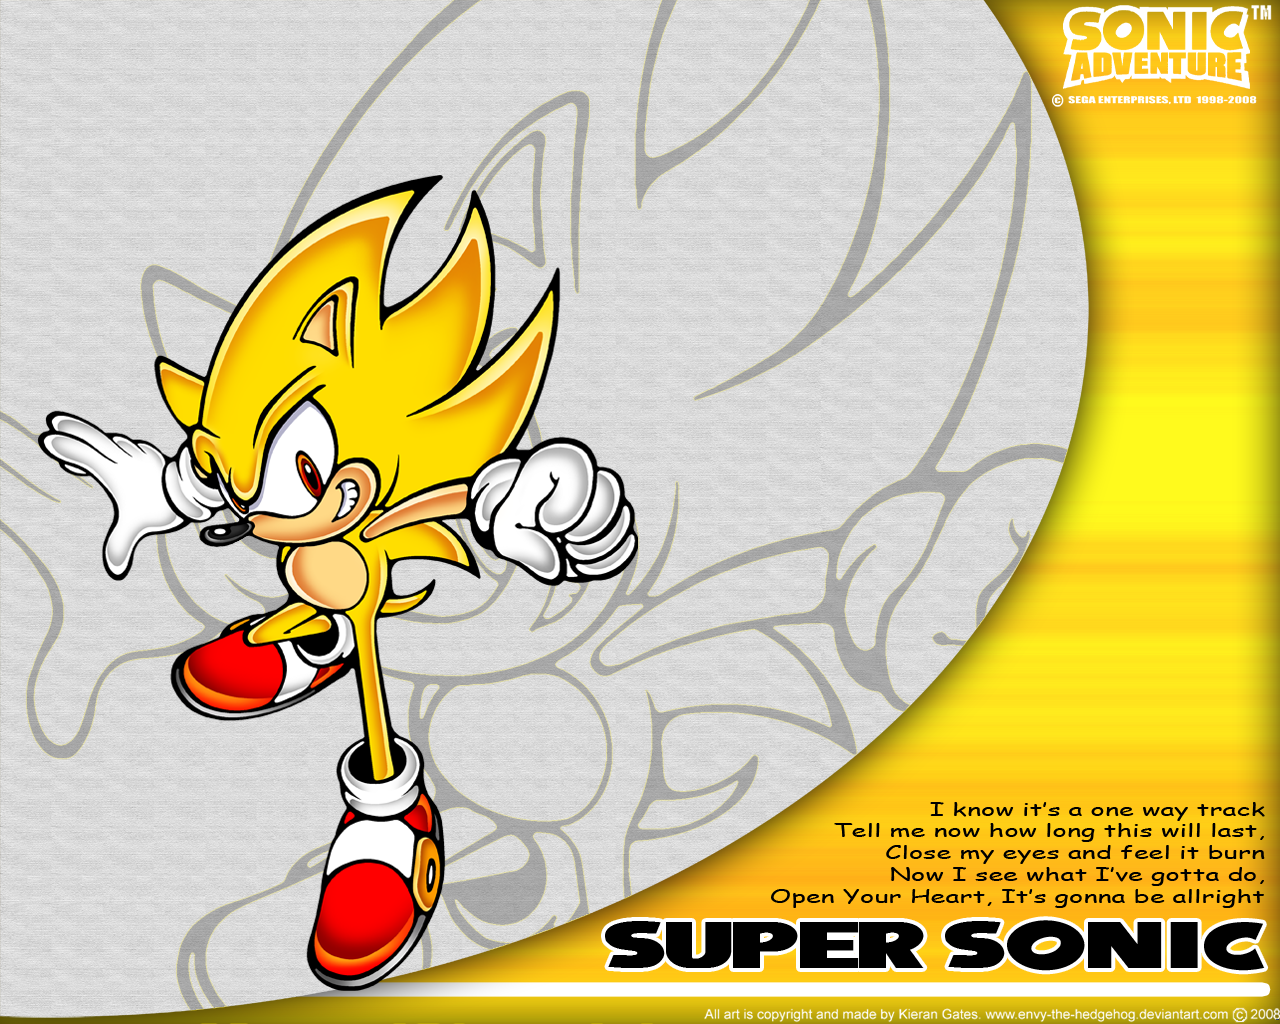 Sonic Adventure DX Wallpapers G / C Entertainment System